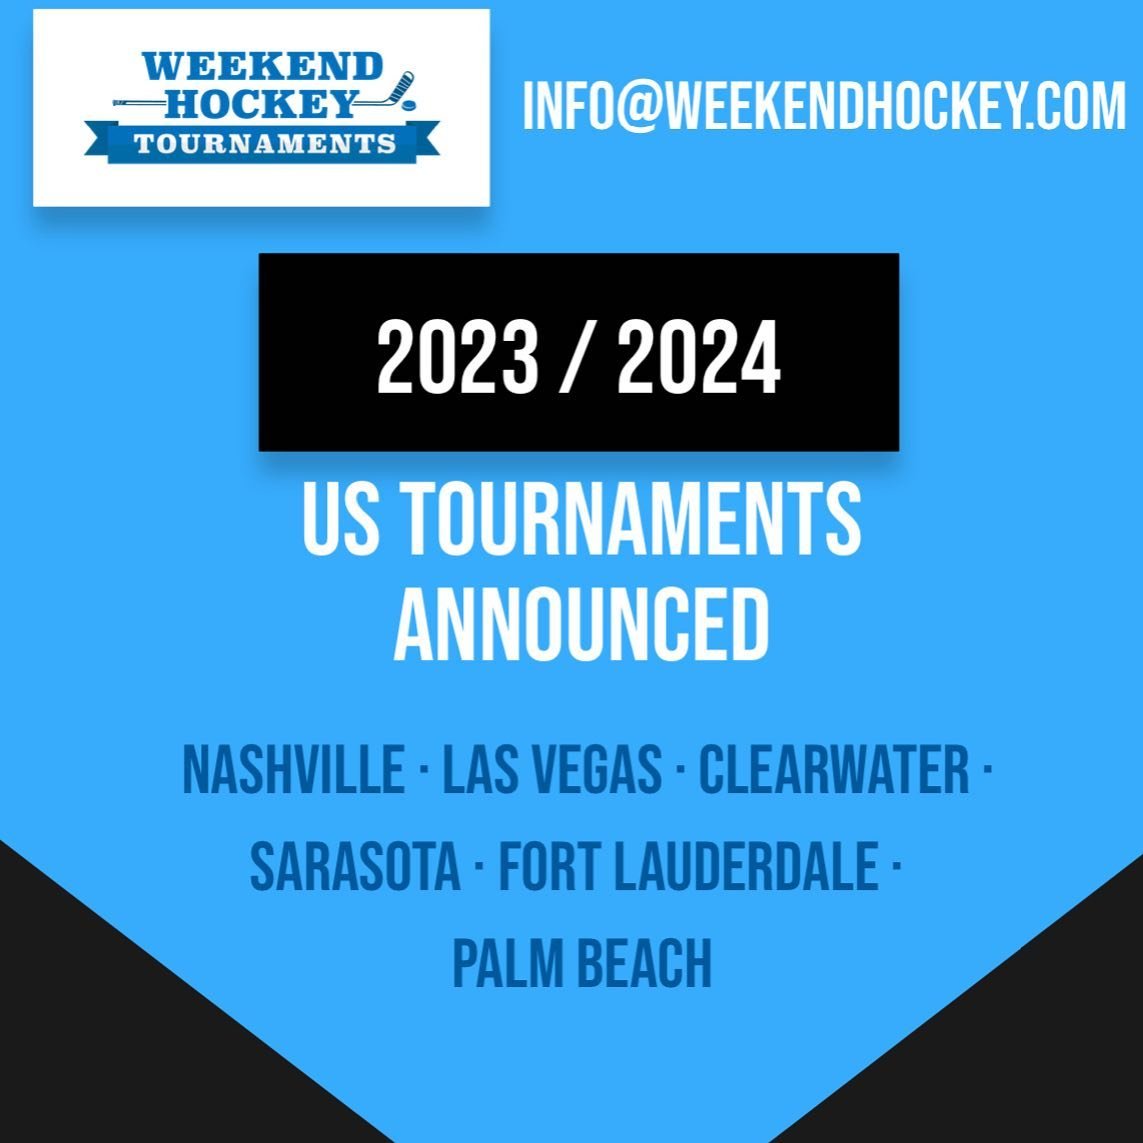 Check out Weekend Hockey’s 2023/2024 Upcoming Schedule and Locations!